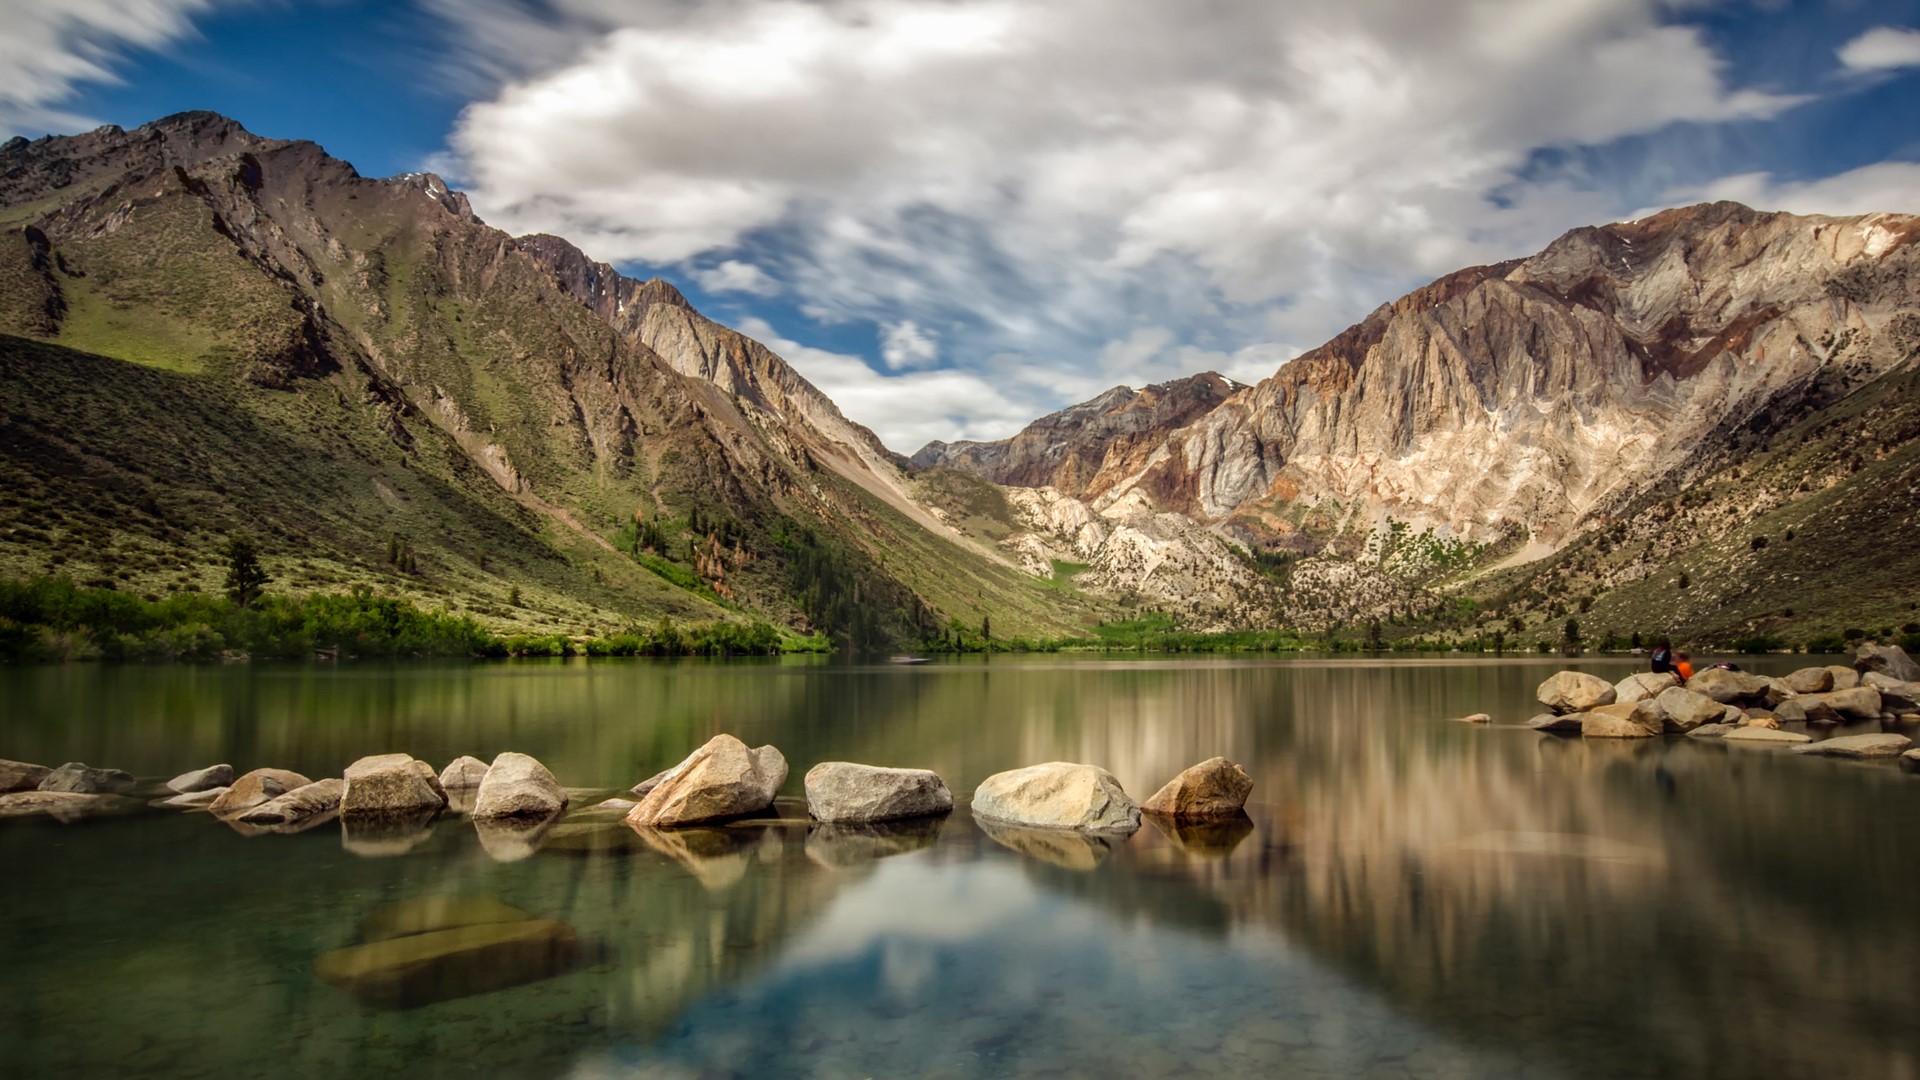 Nature Landscape Clouds Rocks Trees Clear Water Mountains Sky Long Exposure Convict Lake California  1920x1080